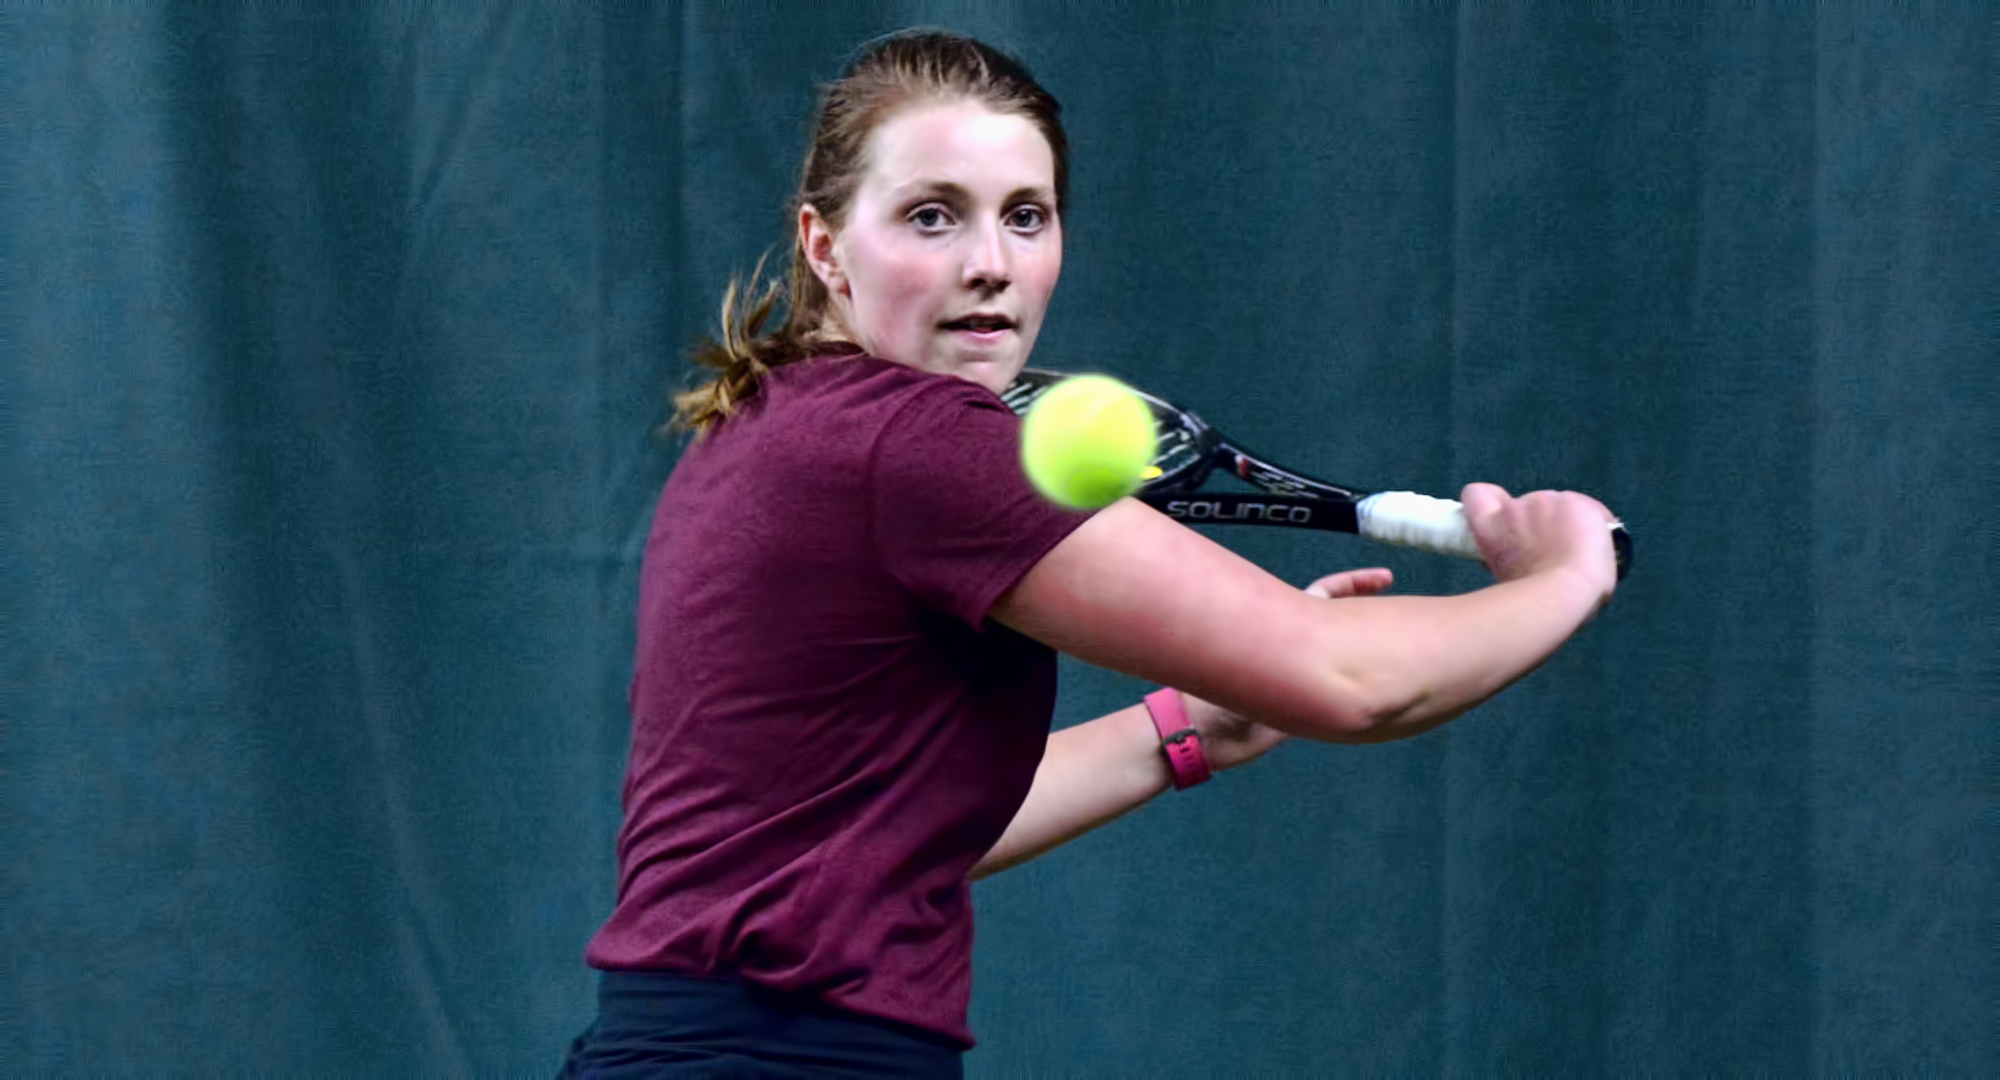 Senior Kendra Stoick focuses on the ball during her win at No.2 singles against Macalester. Stoick overcame food poisoning to win in straight sets.